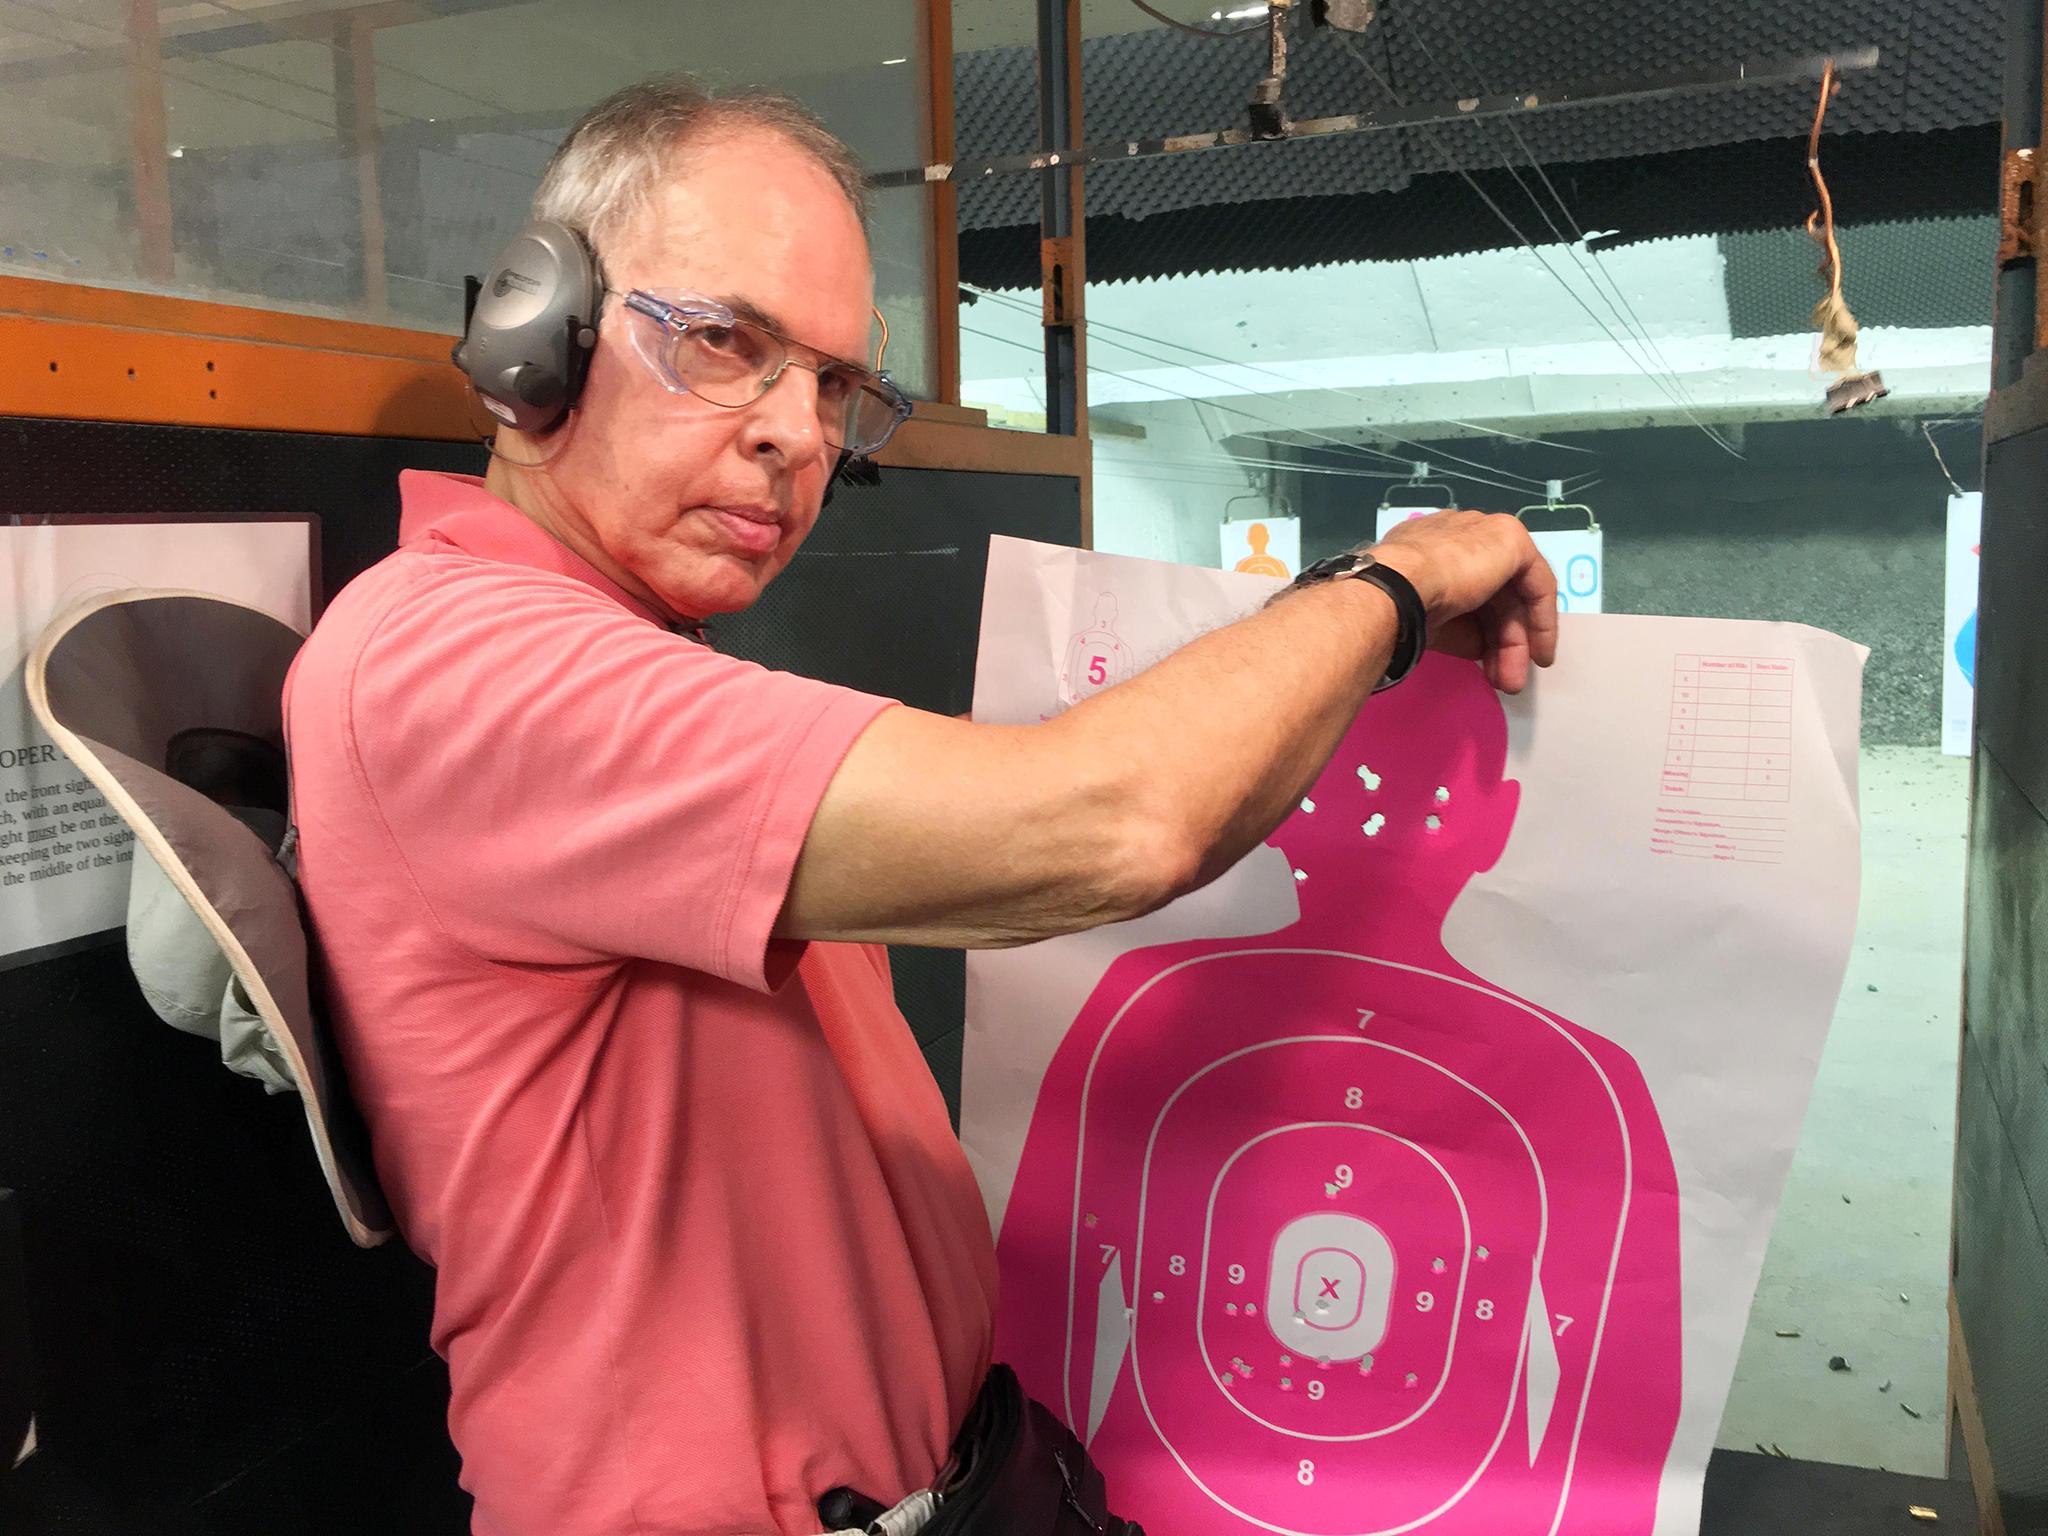 Tom Nelson has spent years trying to get other gay men and women to learn how to protect themselves with concealed weapons